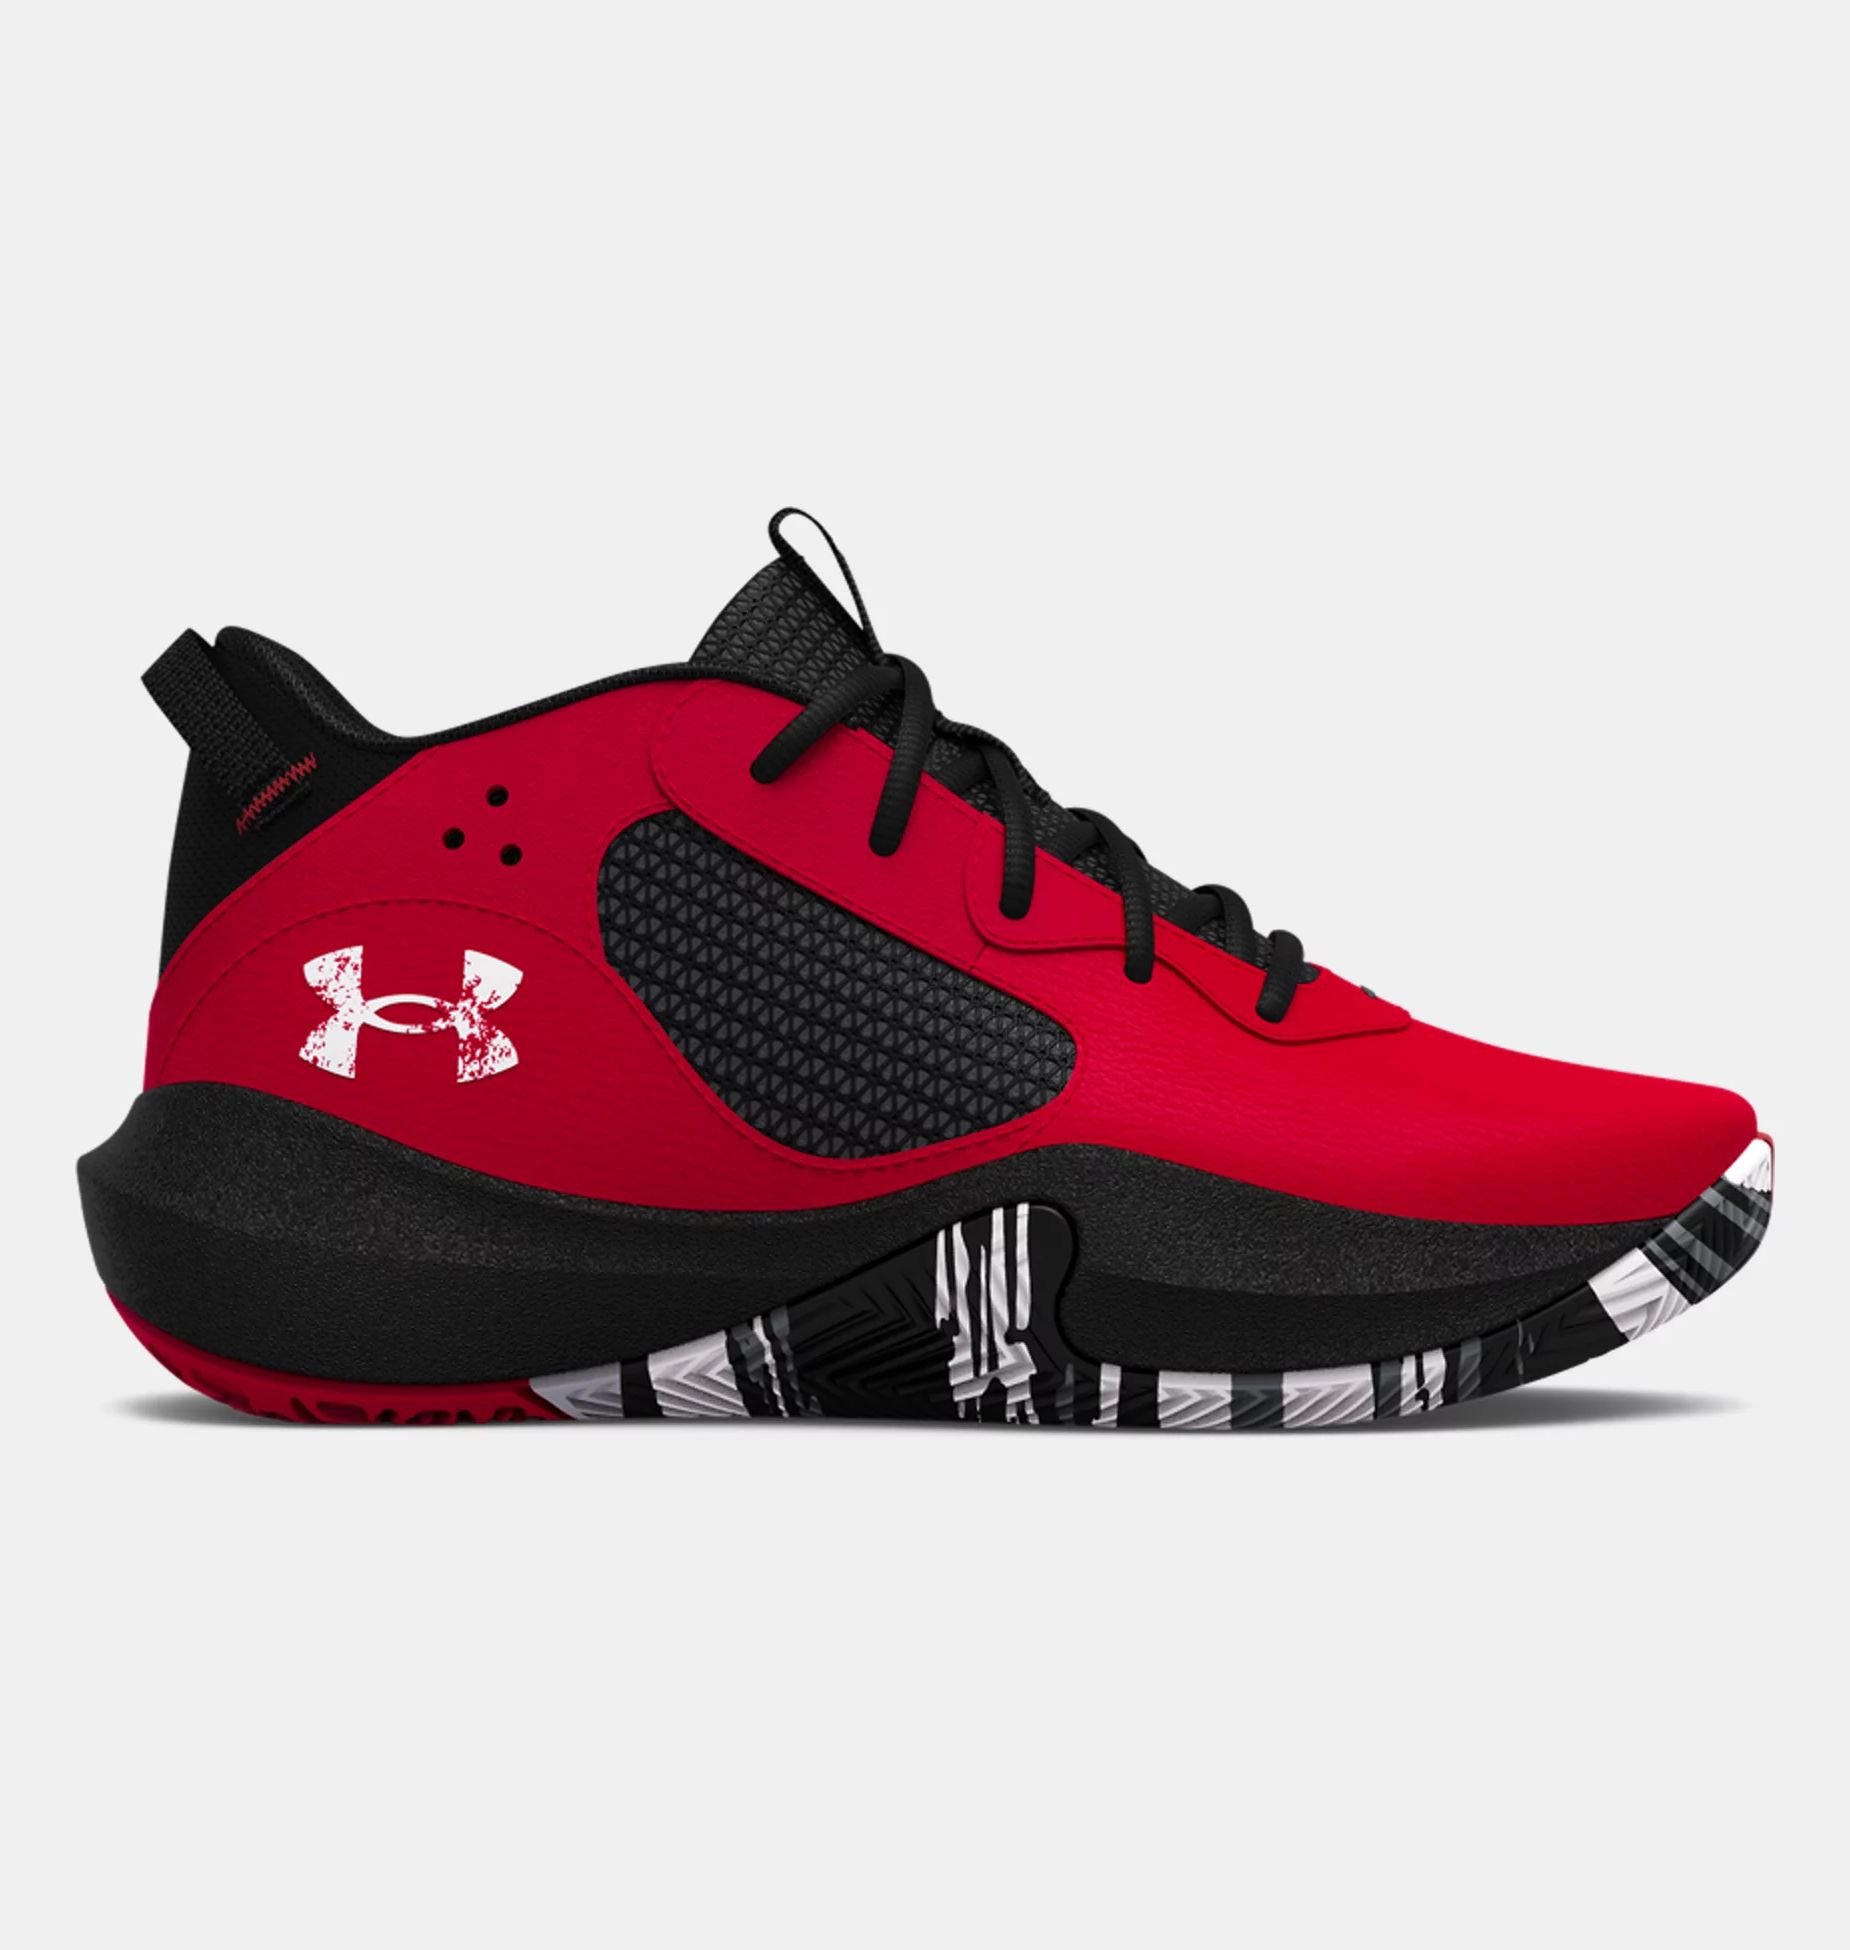  -  under armour Lockdown 6 Basketball Shoes